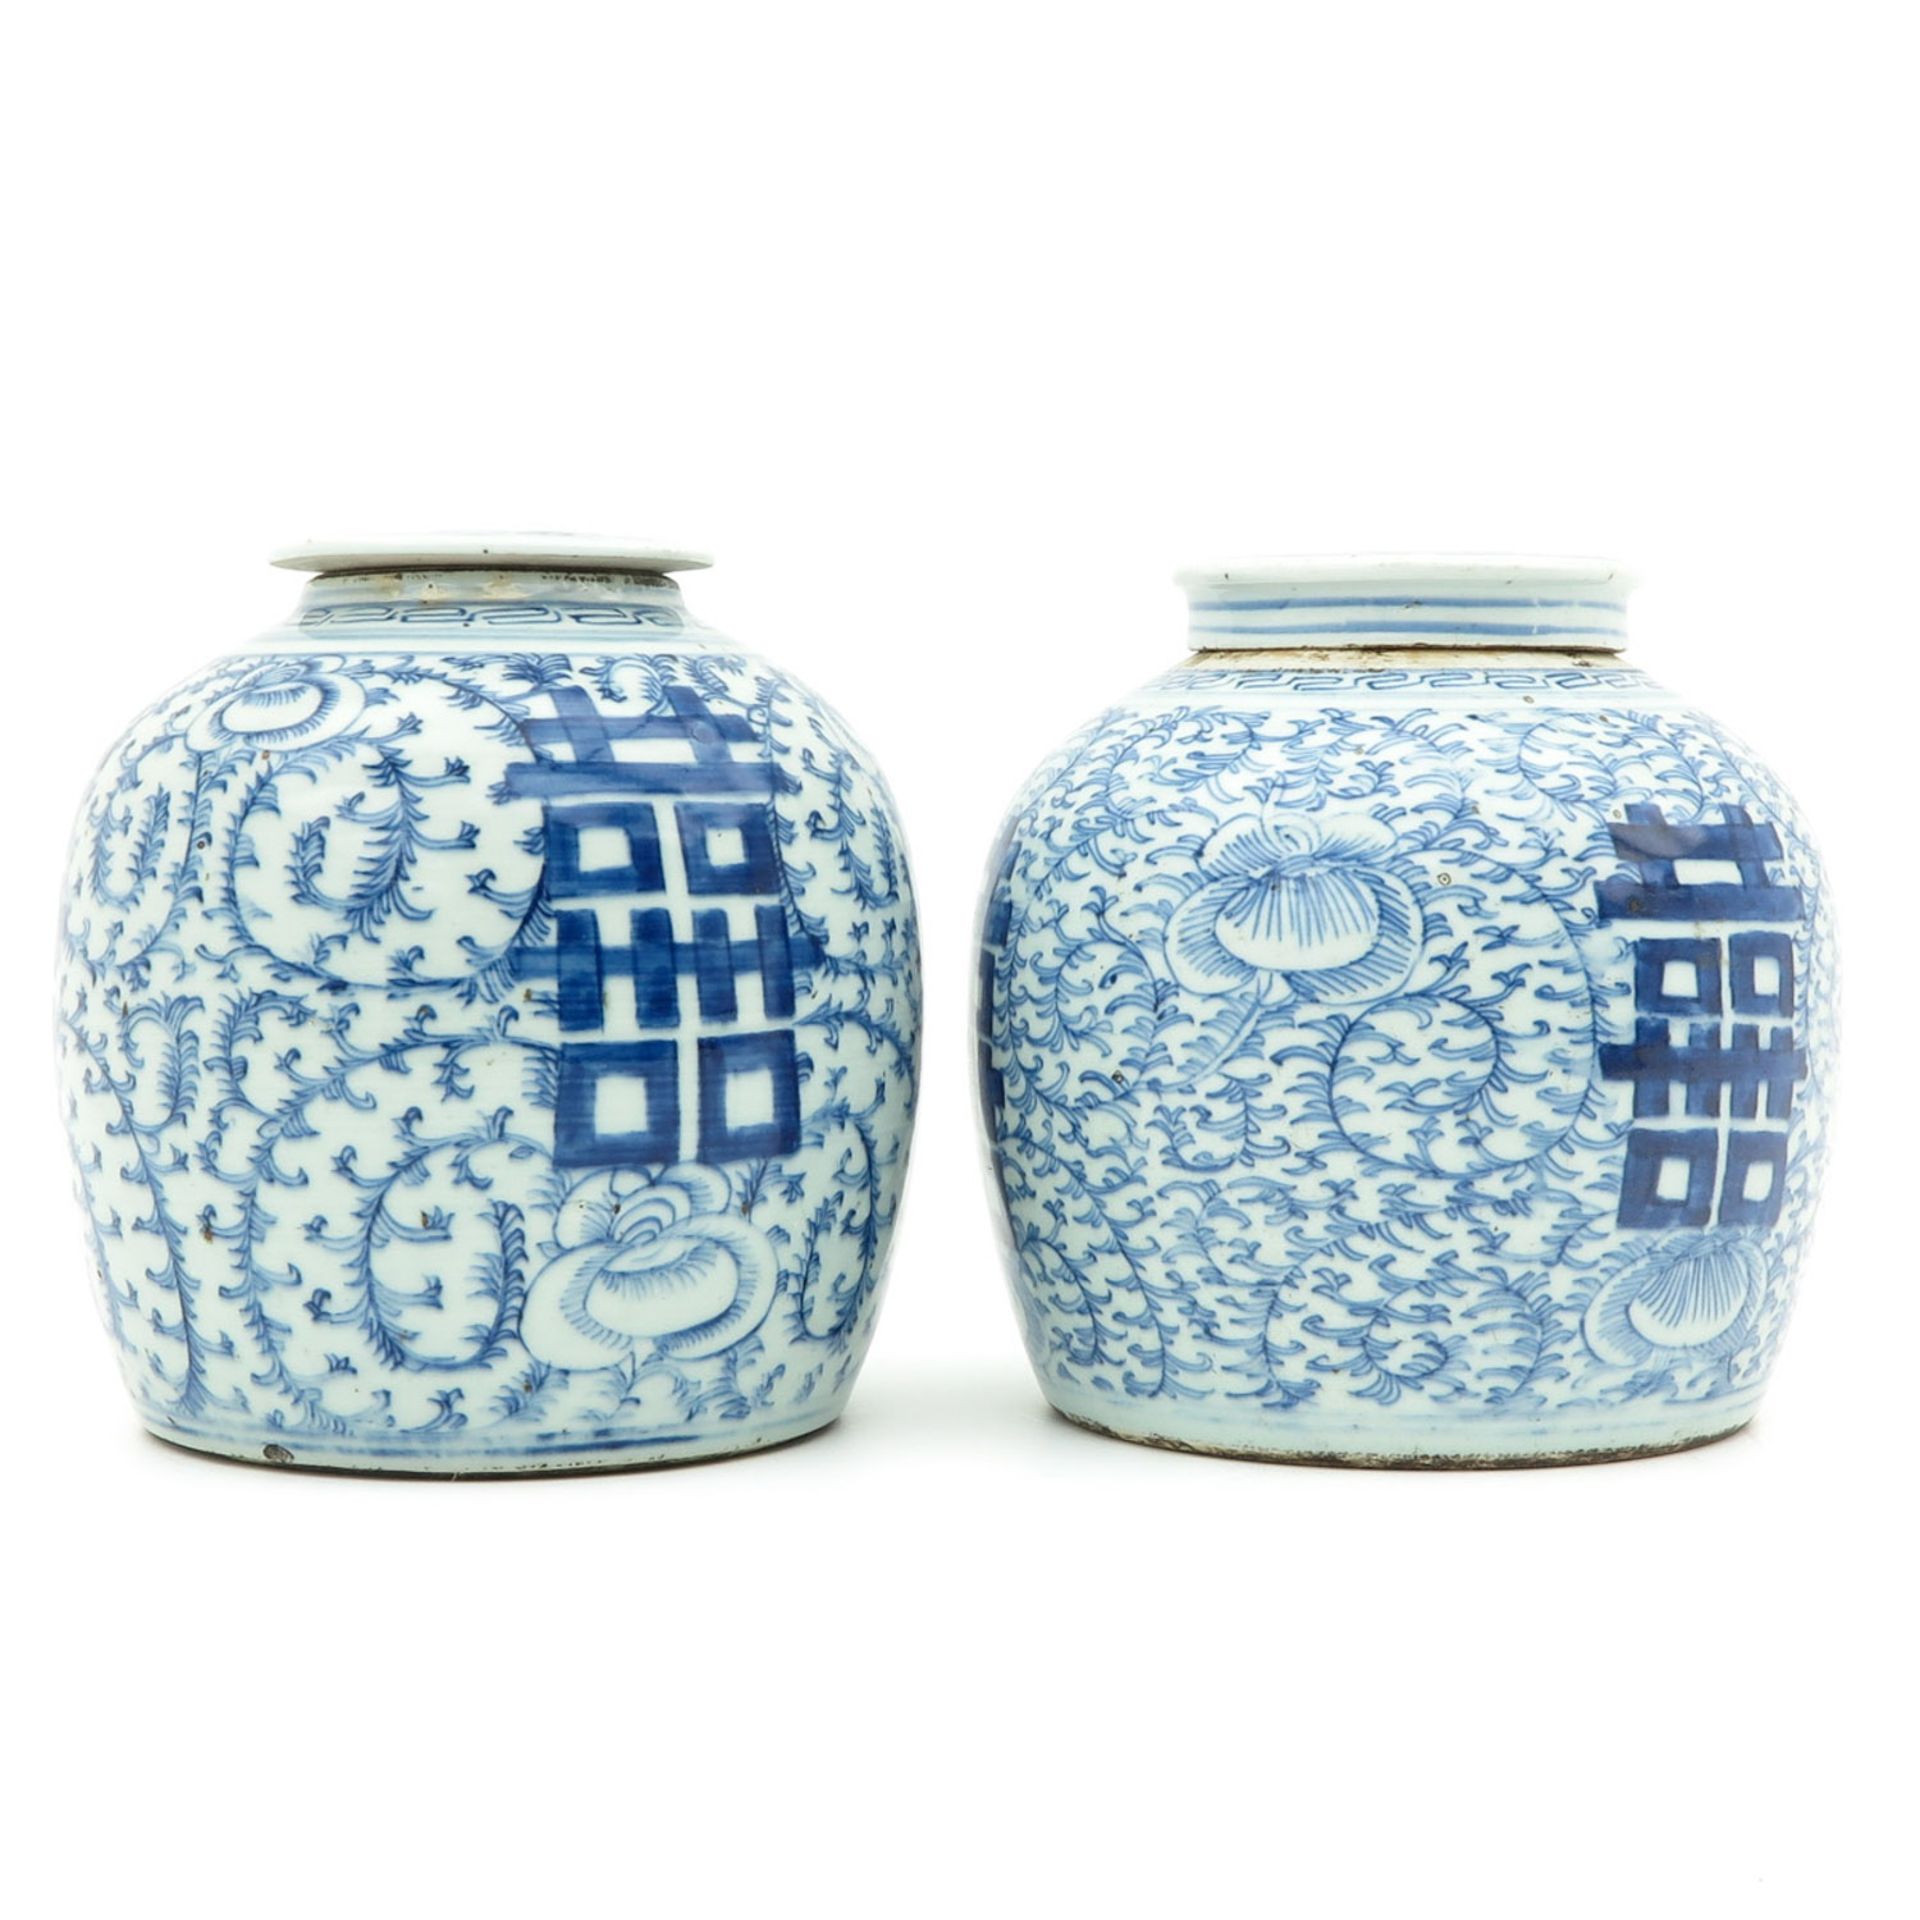 A Pair of Ginger Jars - Image 4 of 10